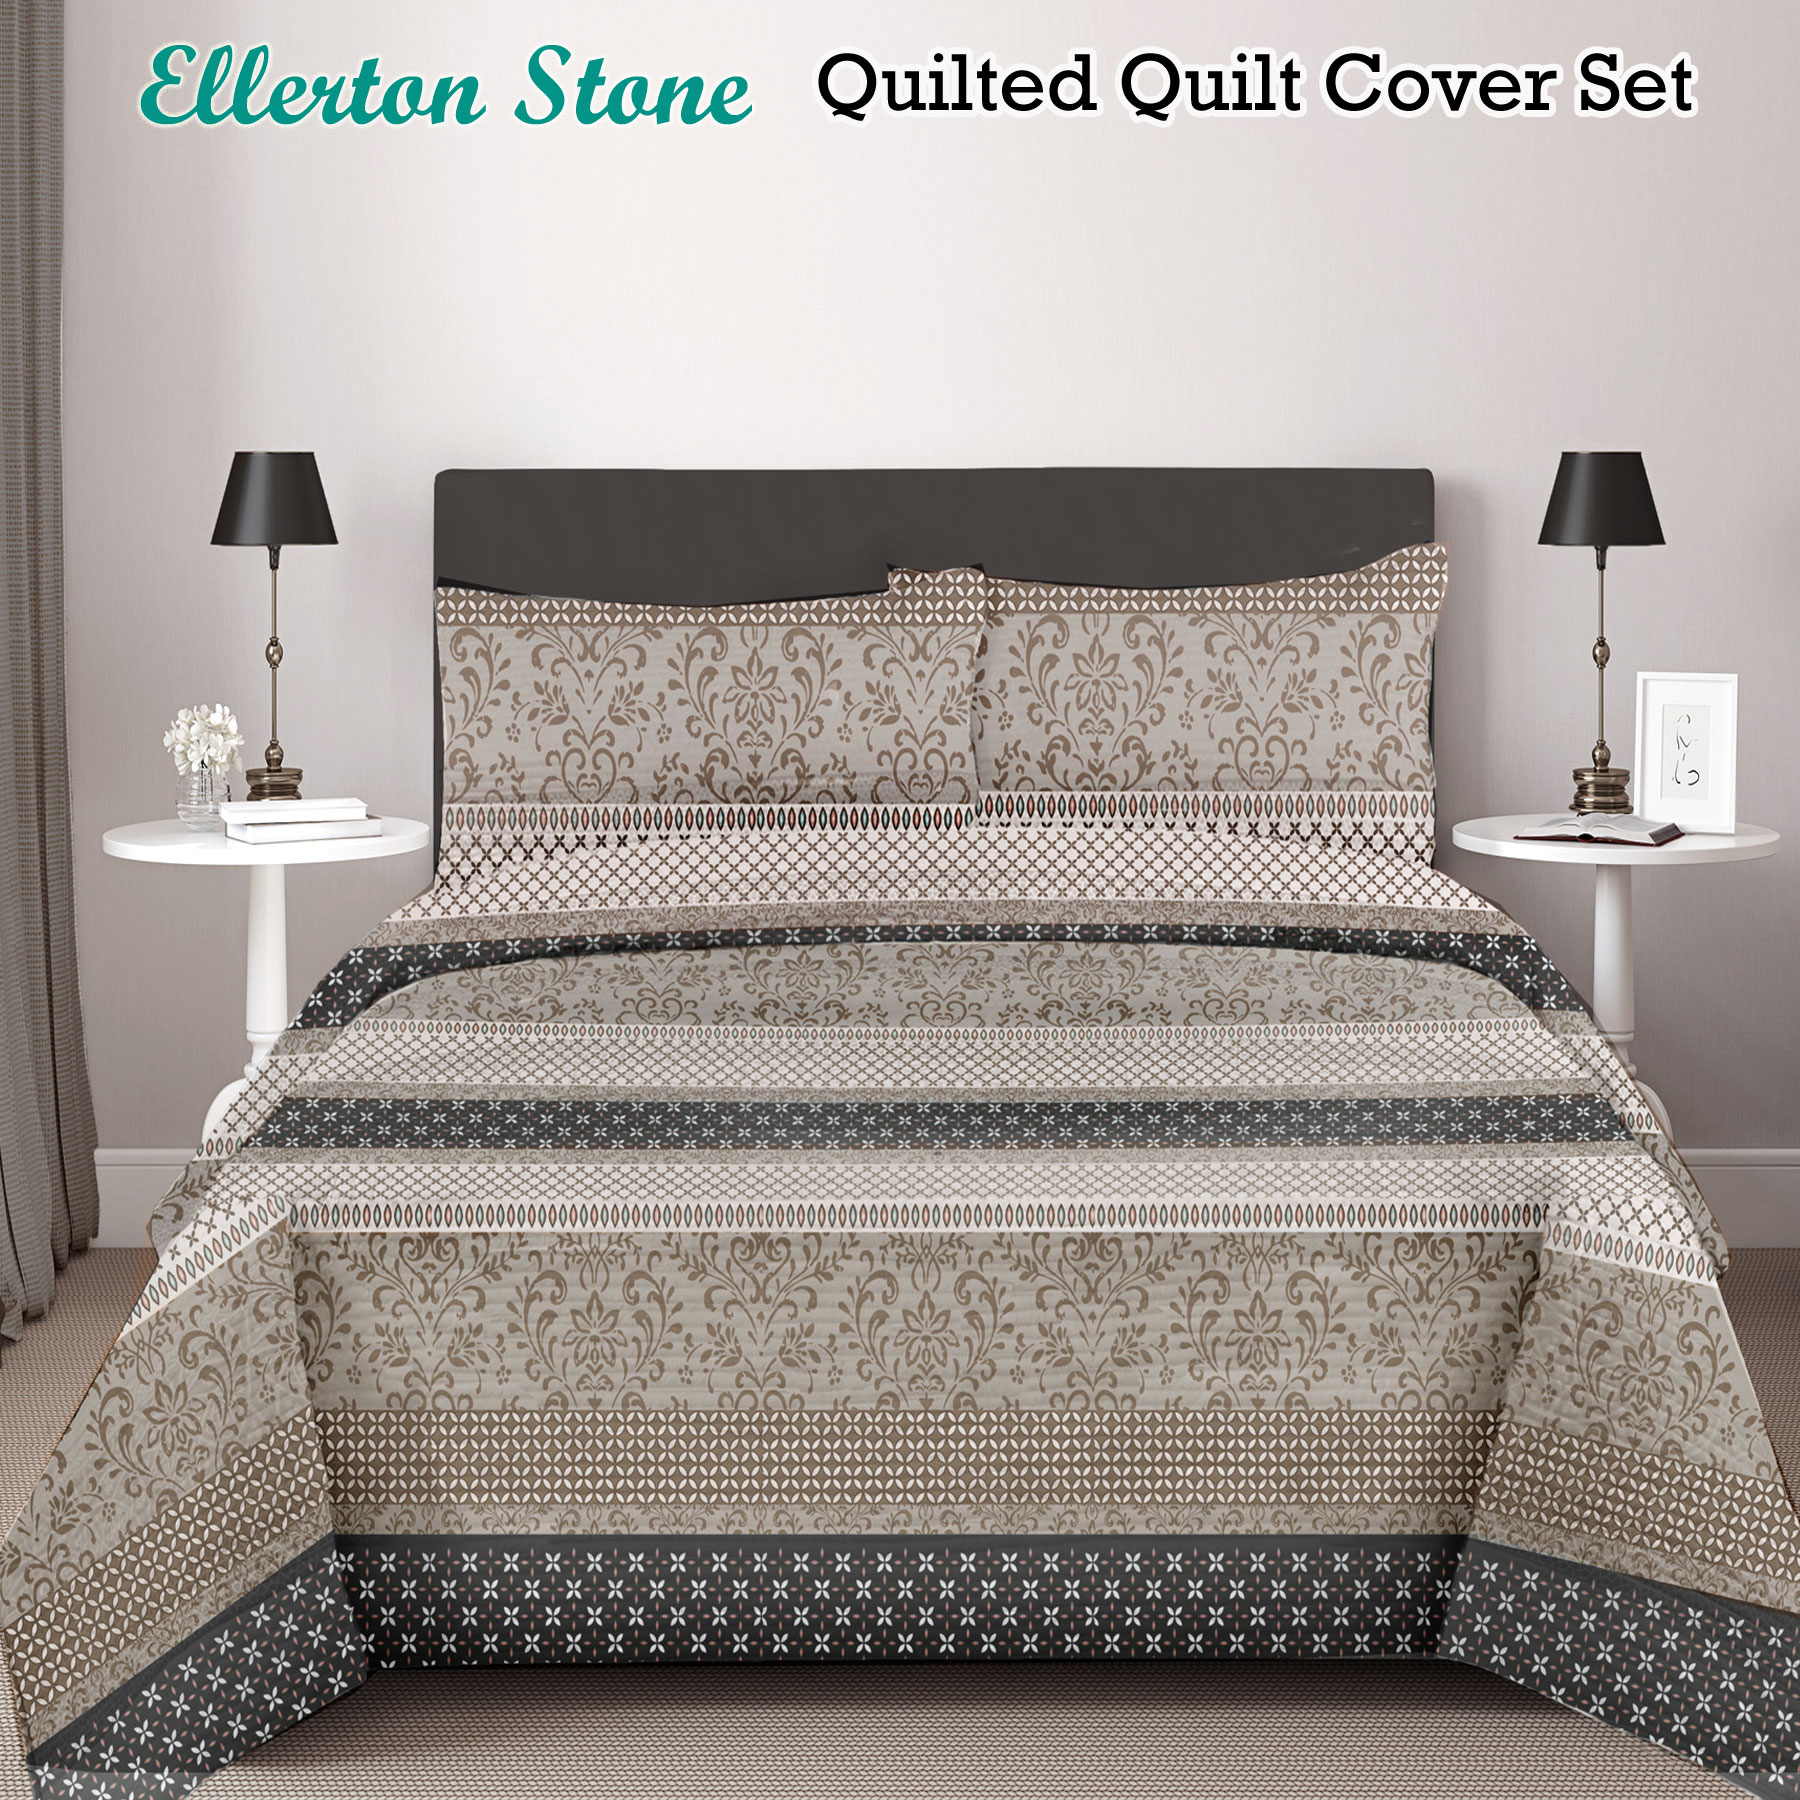 quilted duvet covers canada